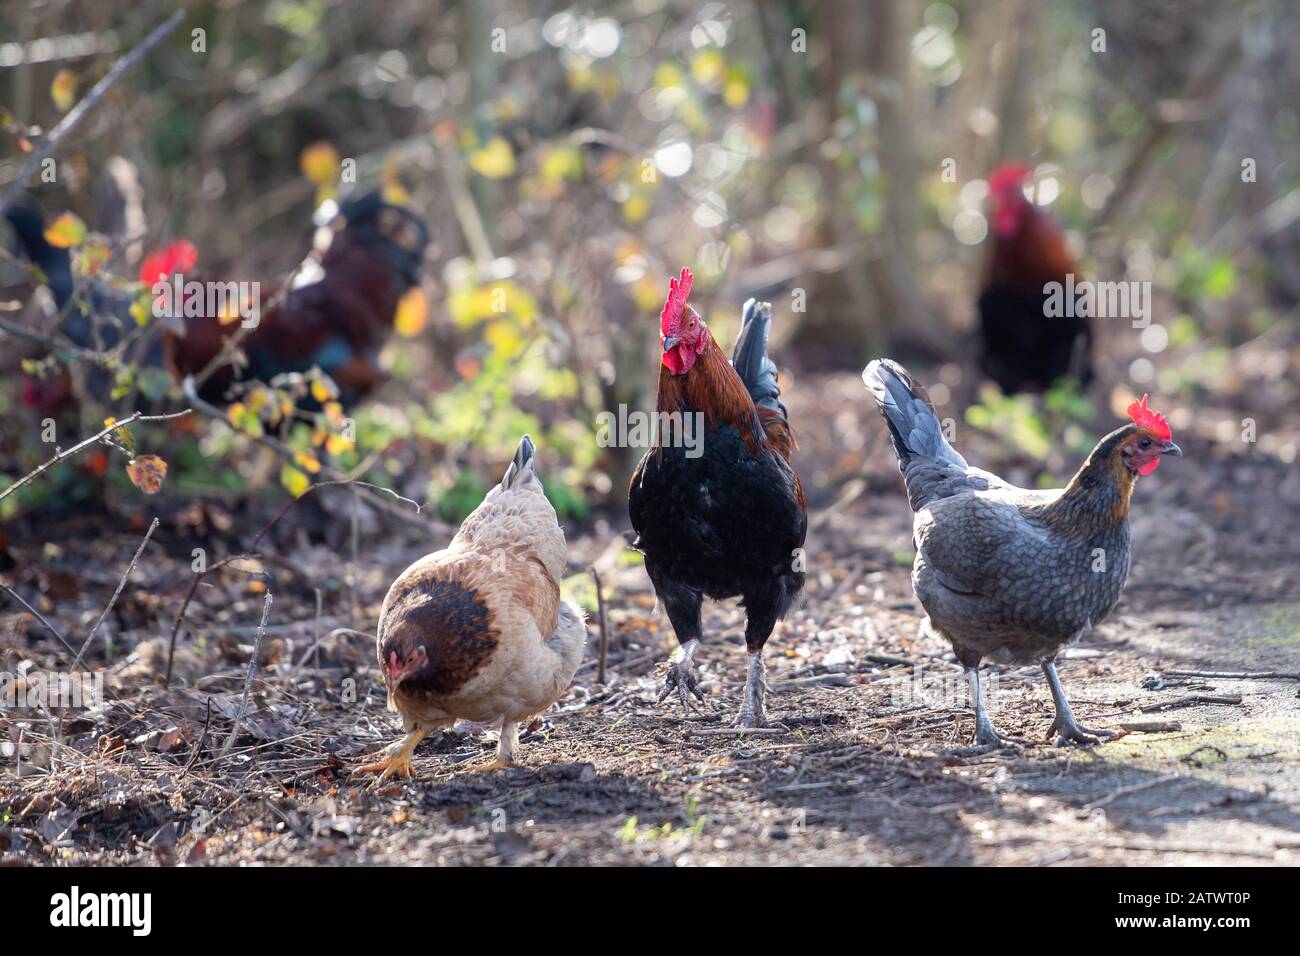 A group of chickens near a housing estate in Diss, Norfolk, after local residents tore down public information notices warning against feeding the chickens that live wild in the area. Stock Photo